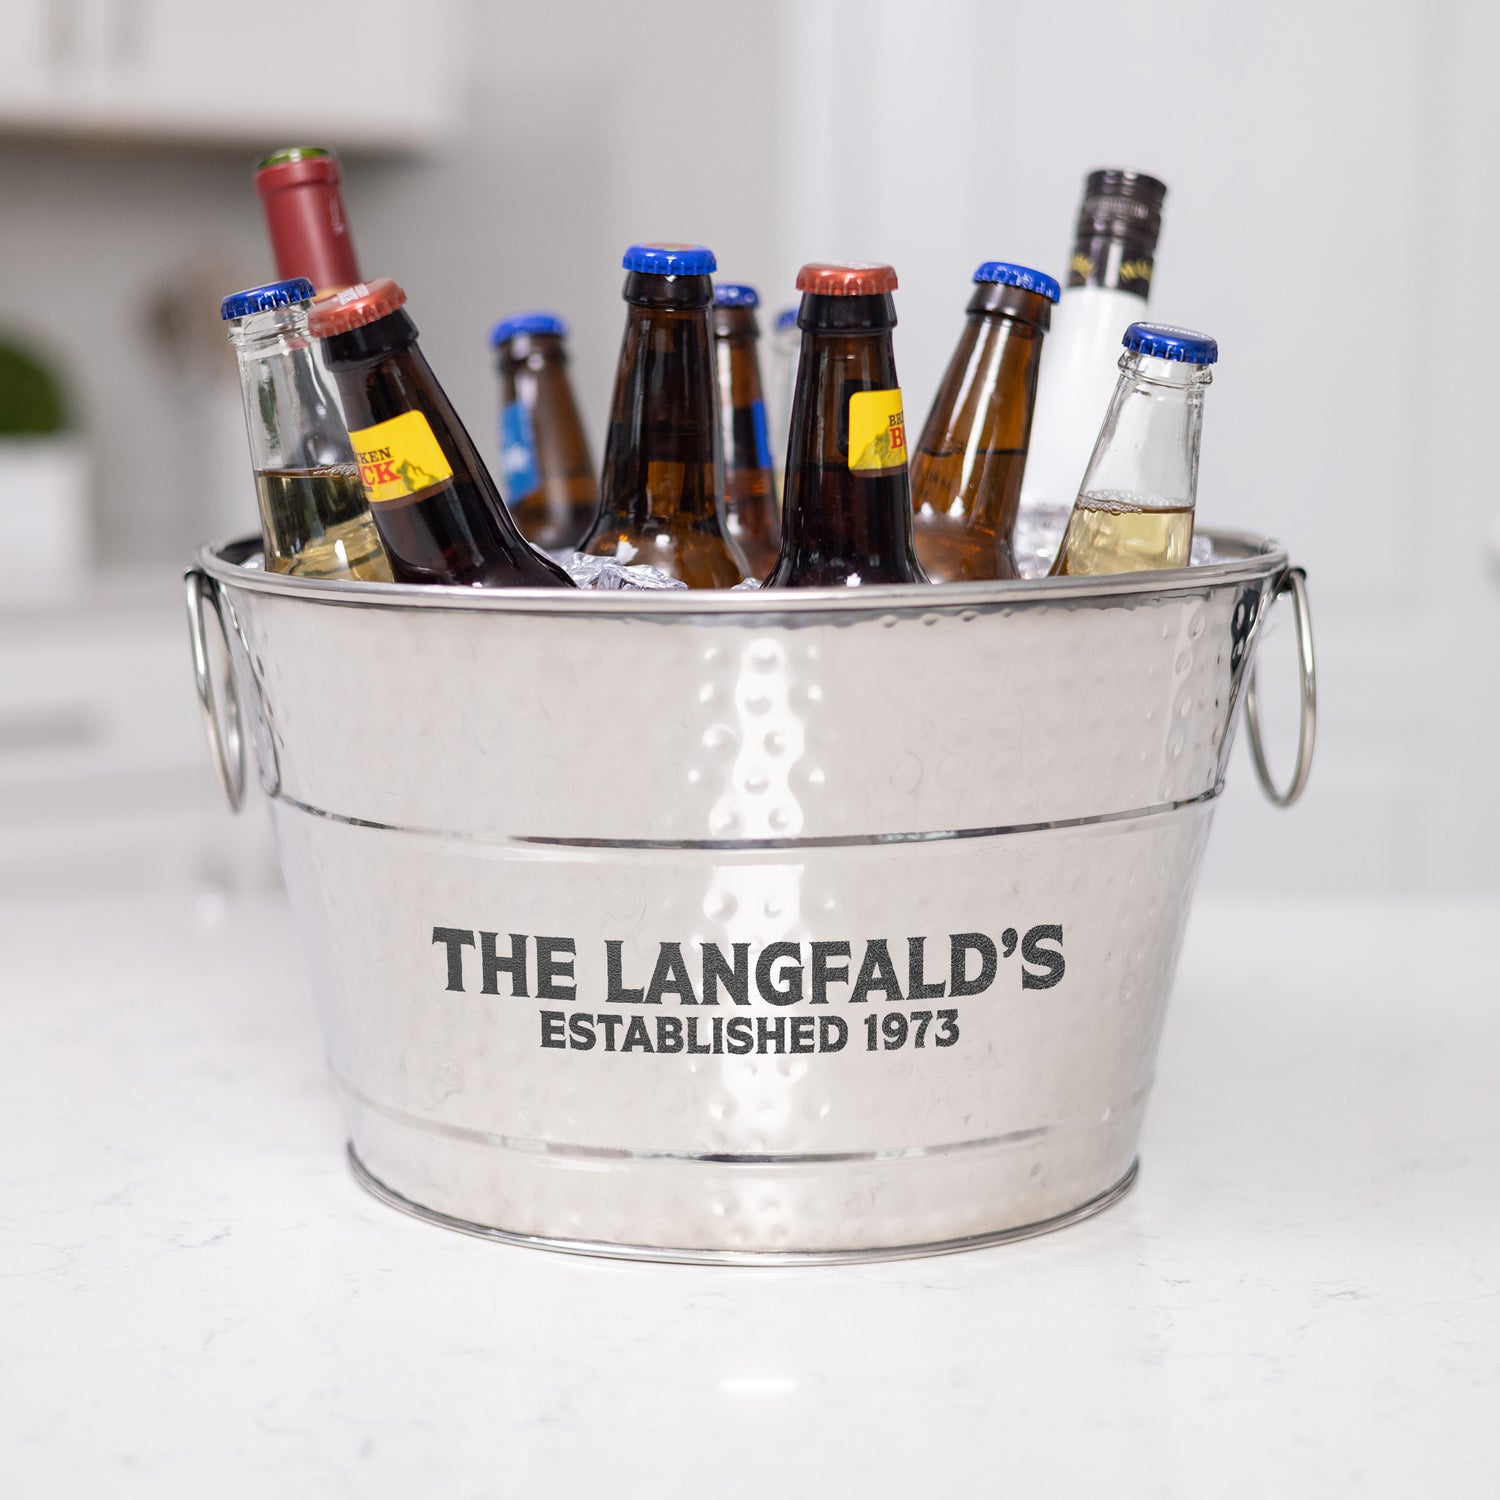 Personalized ice bucket drink cooler for wedding, anniversary, or housewarming gift.  Wine bucket made of premium stainless steel that is leak resistant and keeps drink cold.